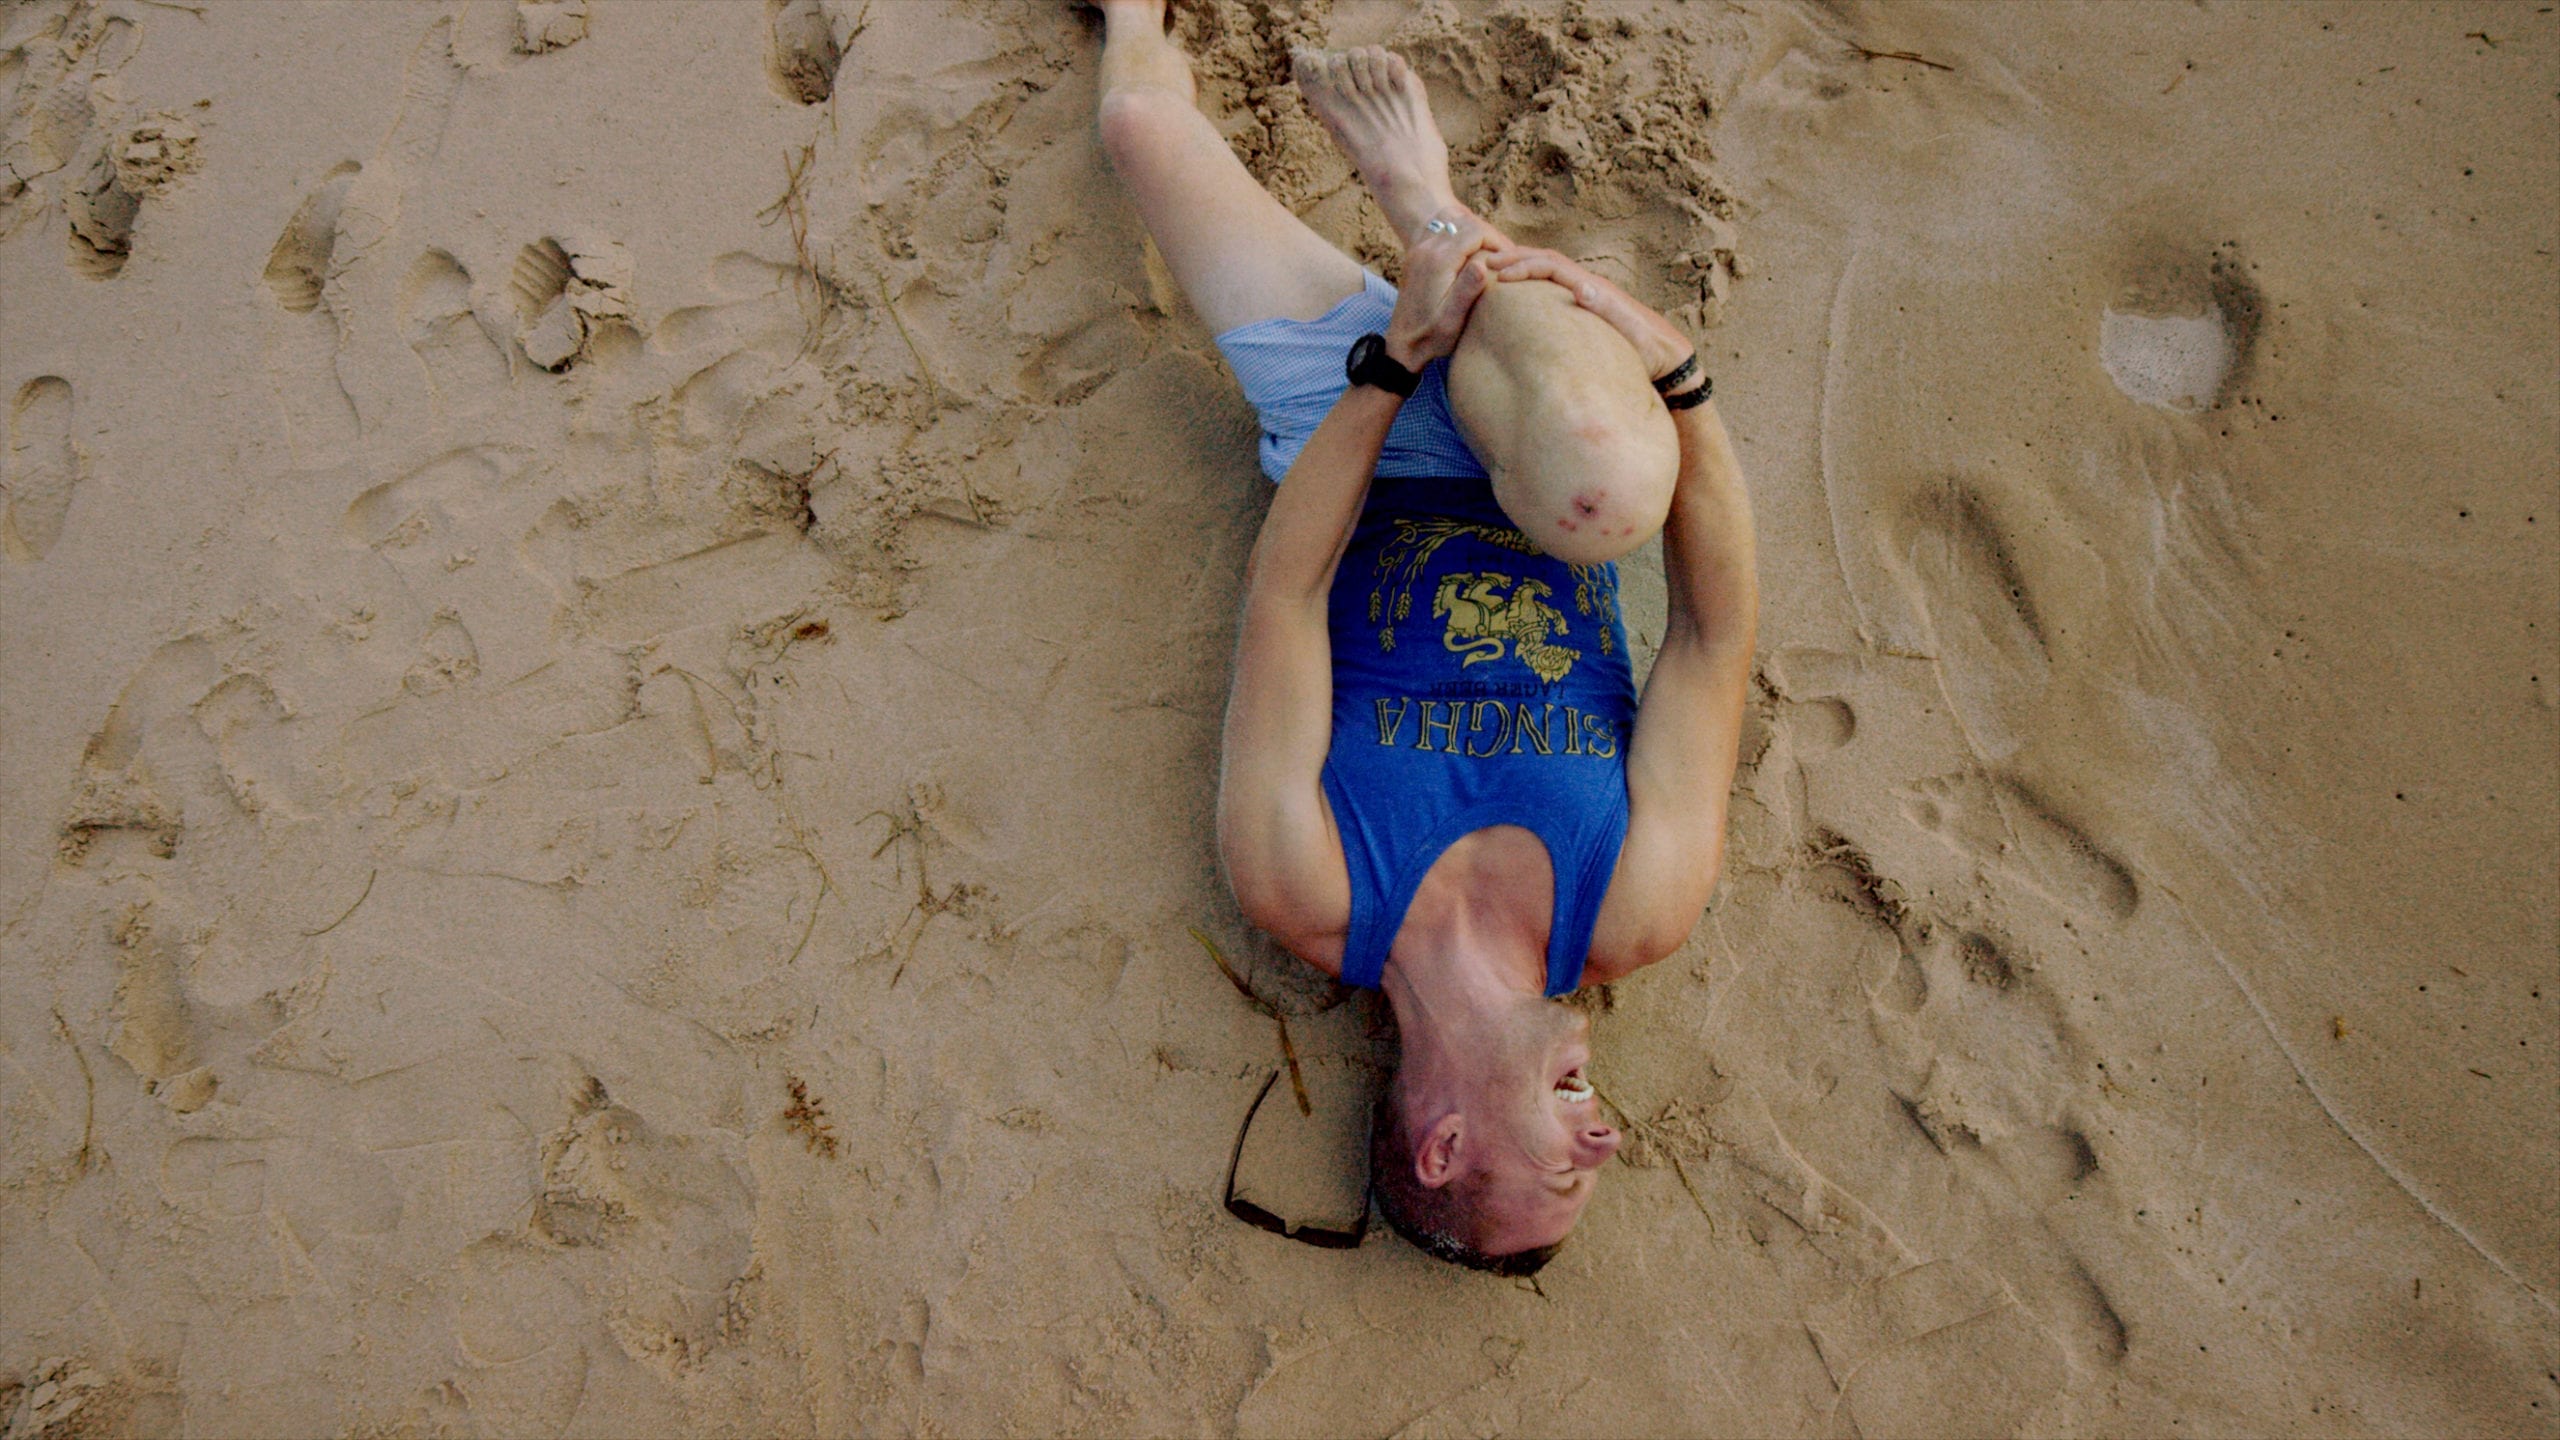 REVA Air Ambulance Overhead view of man wearing blue tank top laying in the sand clutching his leg with scraped knee grimacing in pain